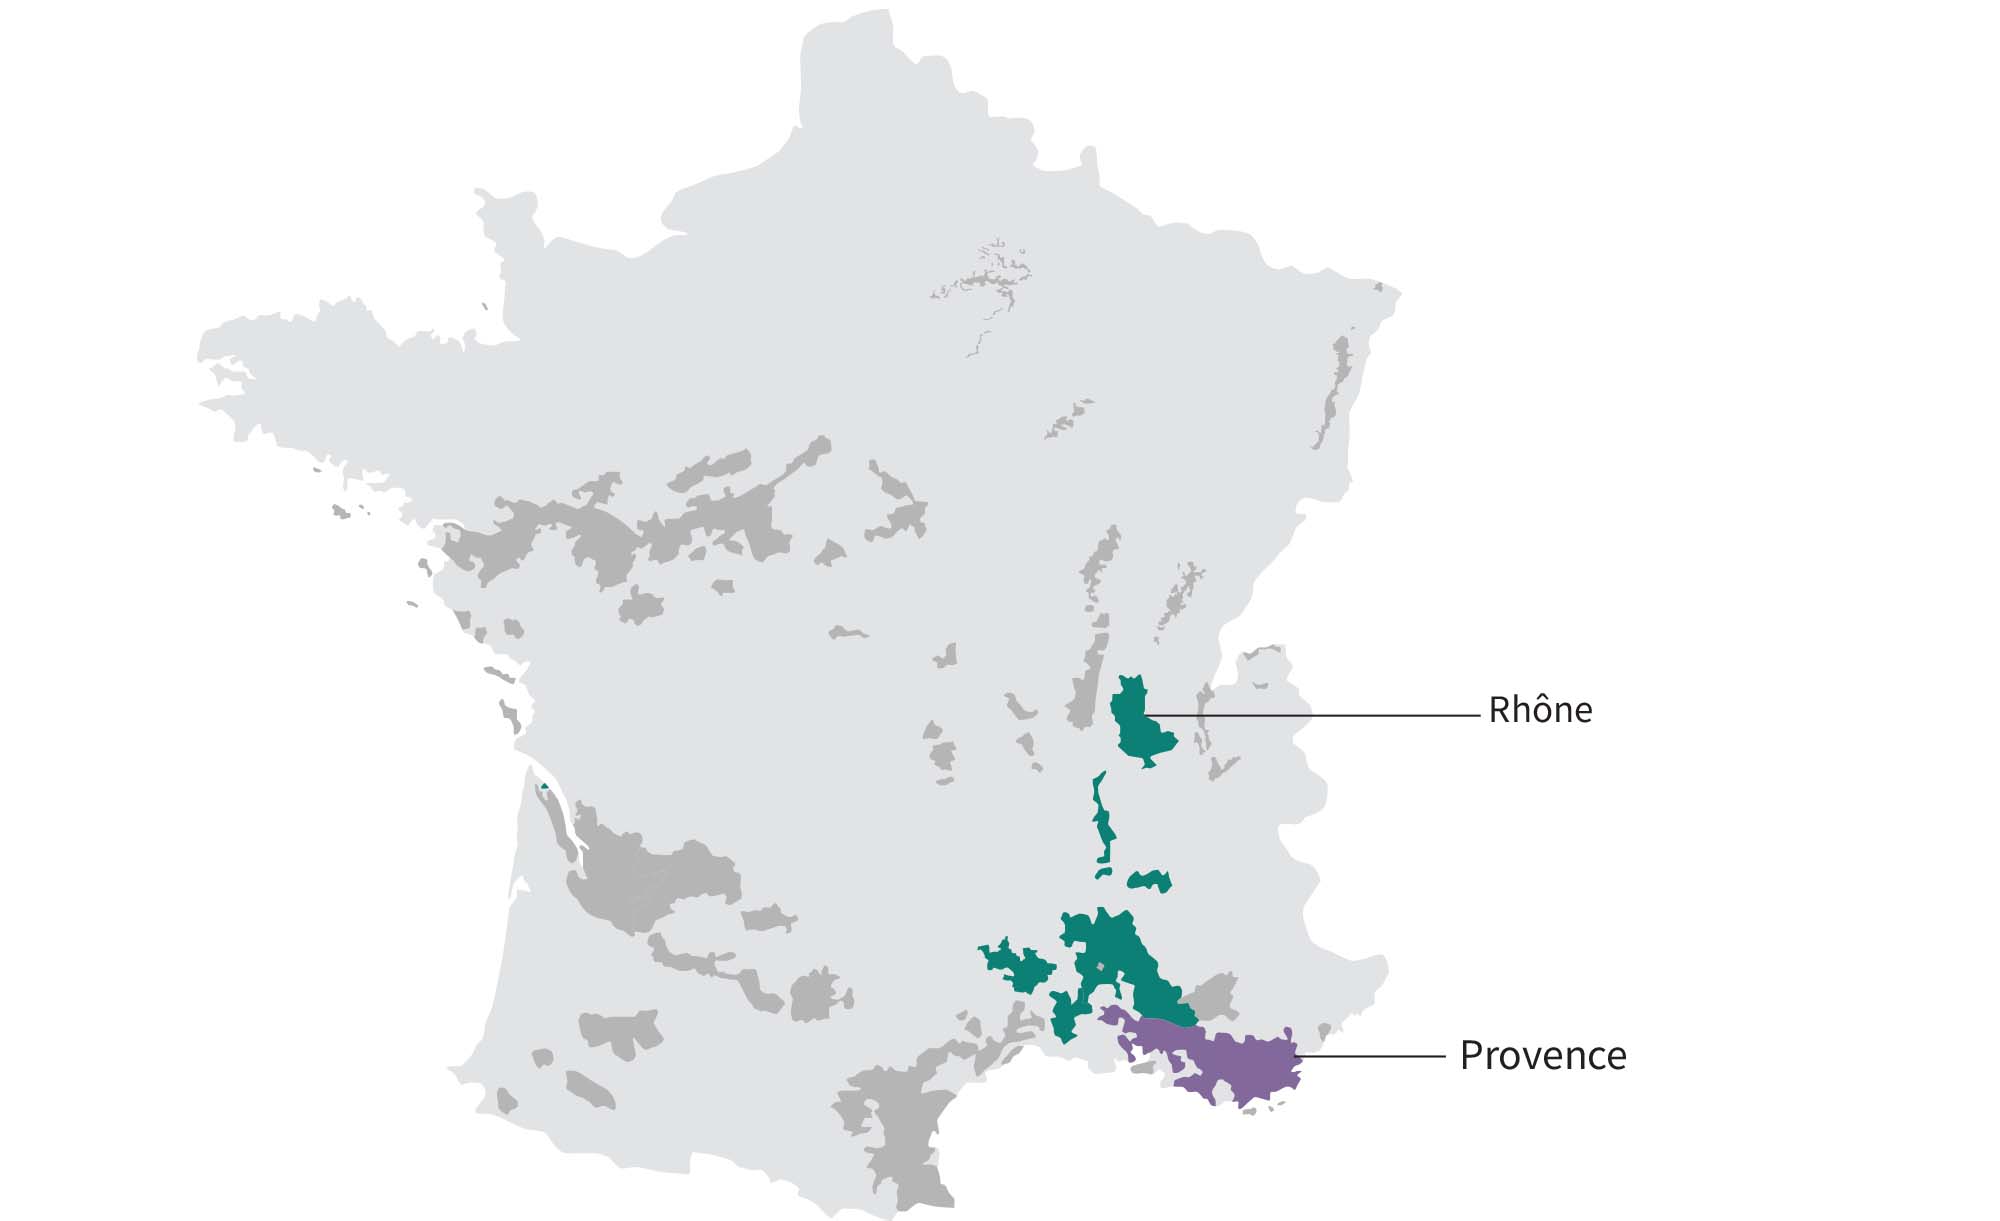 Map of French Rosé wine regions: Rhône and Provence